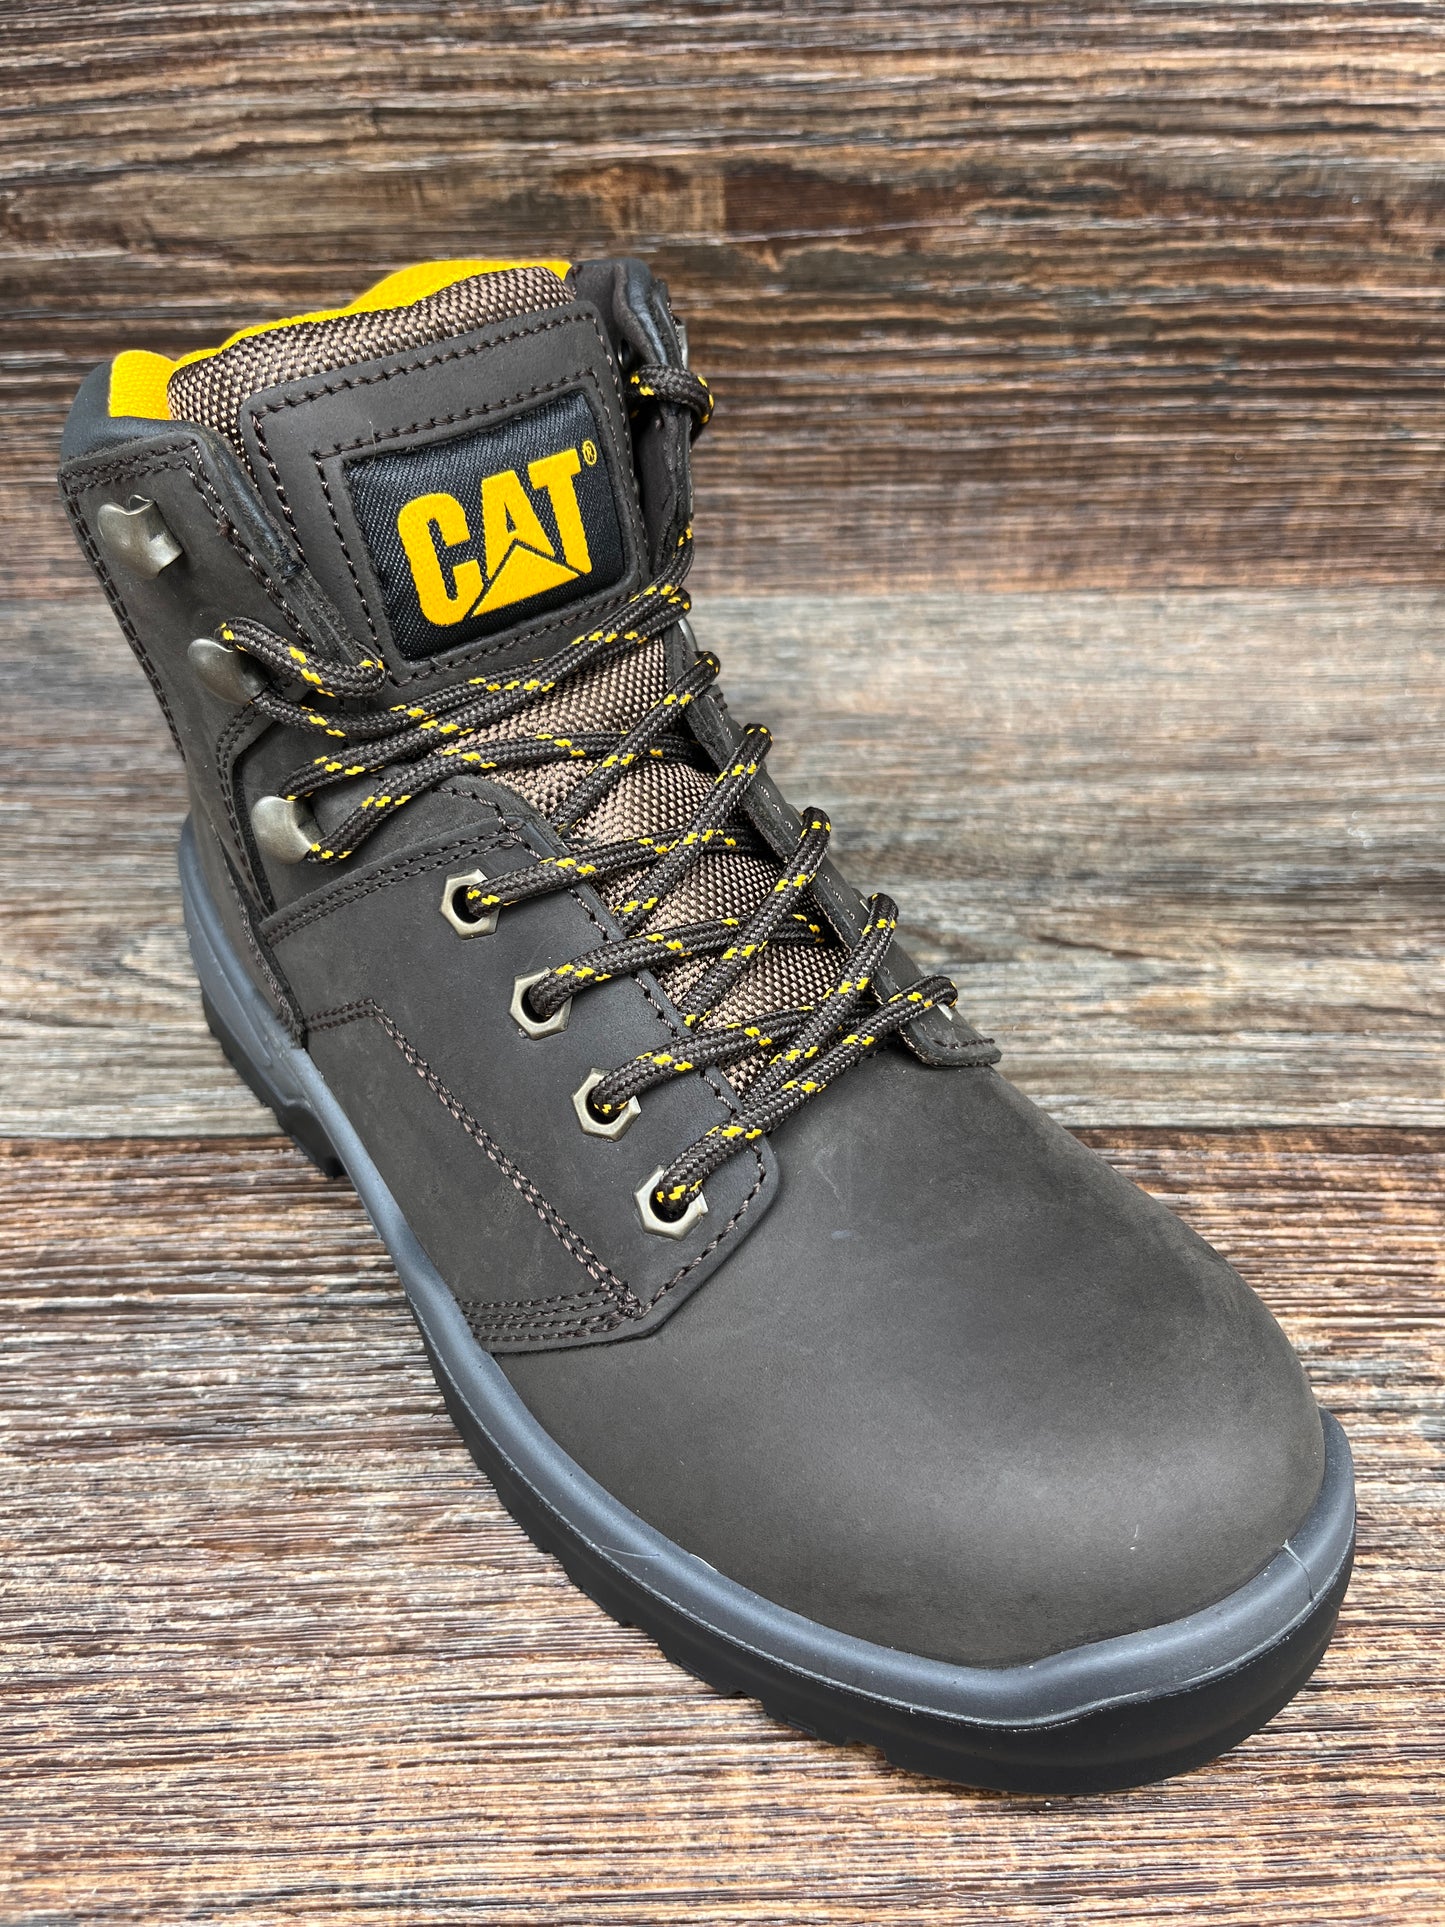 p91672 Men's Striver Lace Up Steel Toe Work Boot by Caterpillar ...